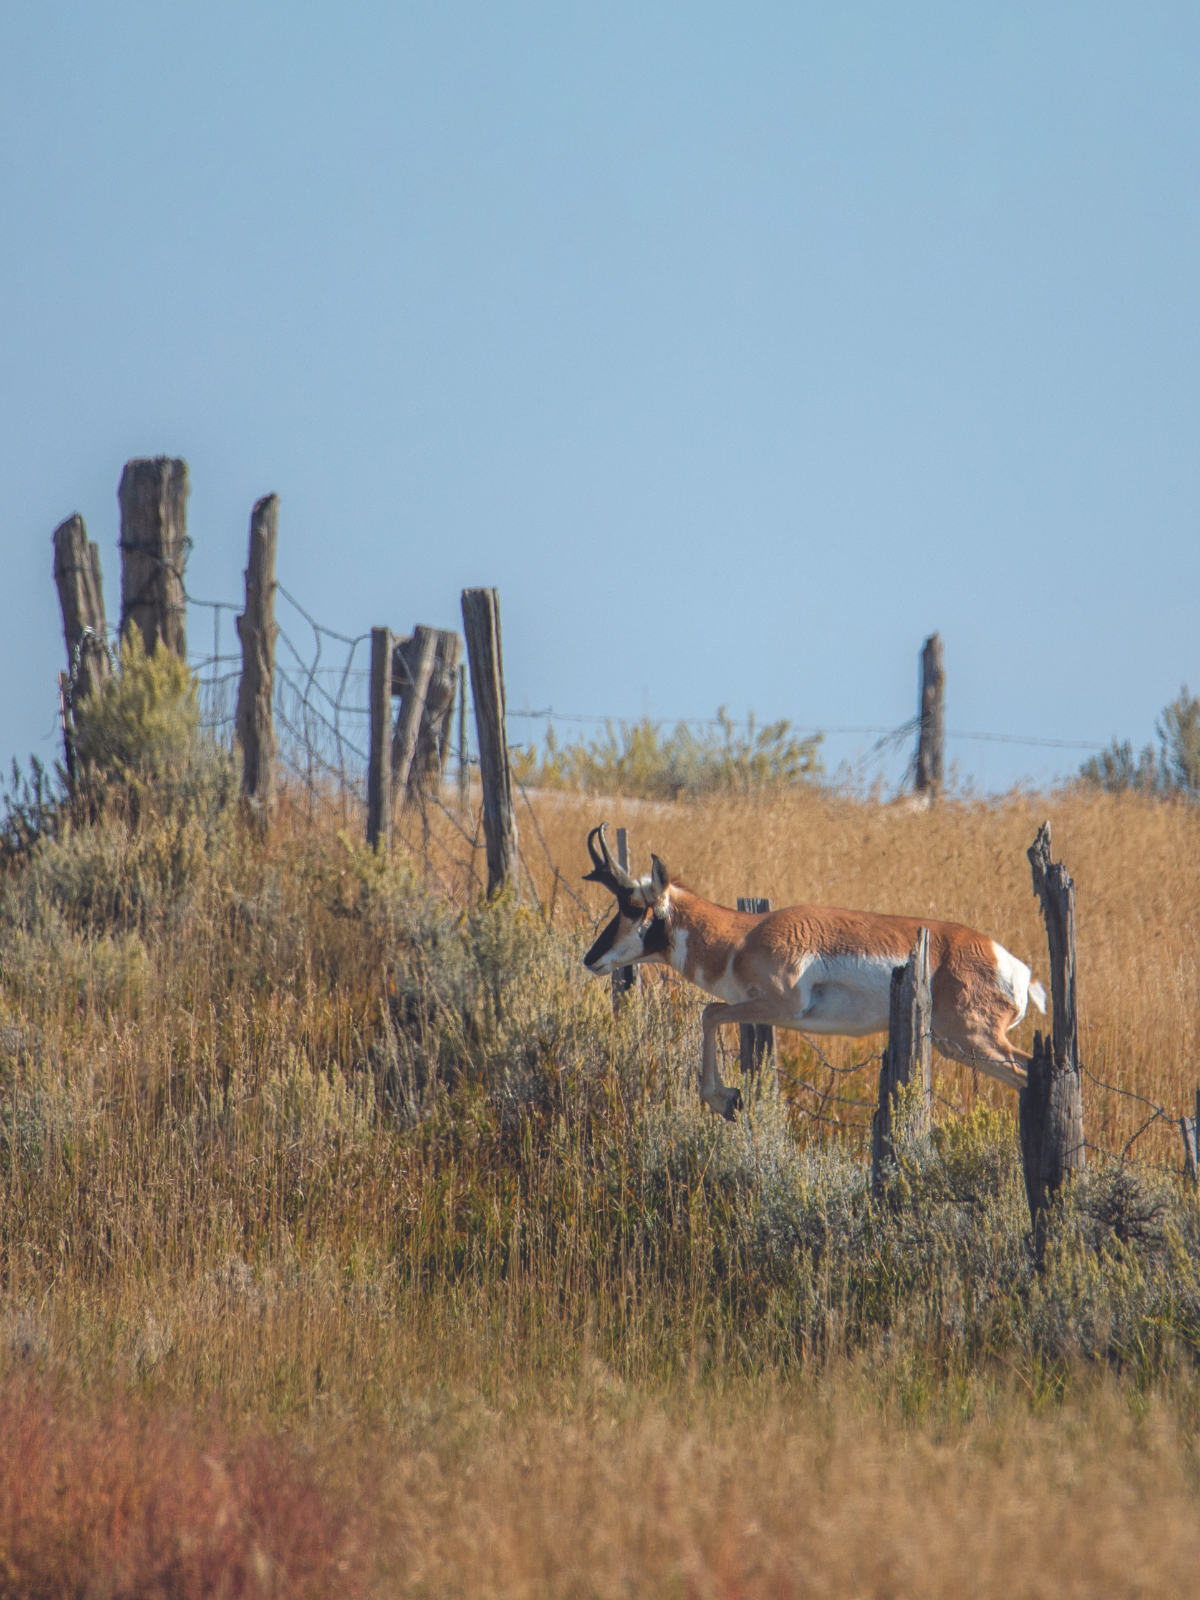 A buck antelope jumps from one grassy pasture to another to cross a woven-wire fence on a clear, sunny day.